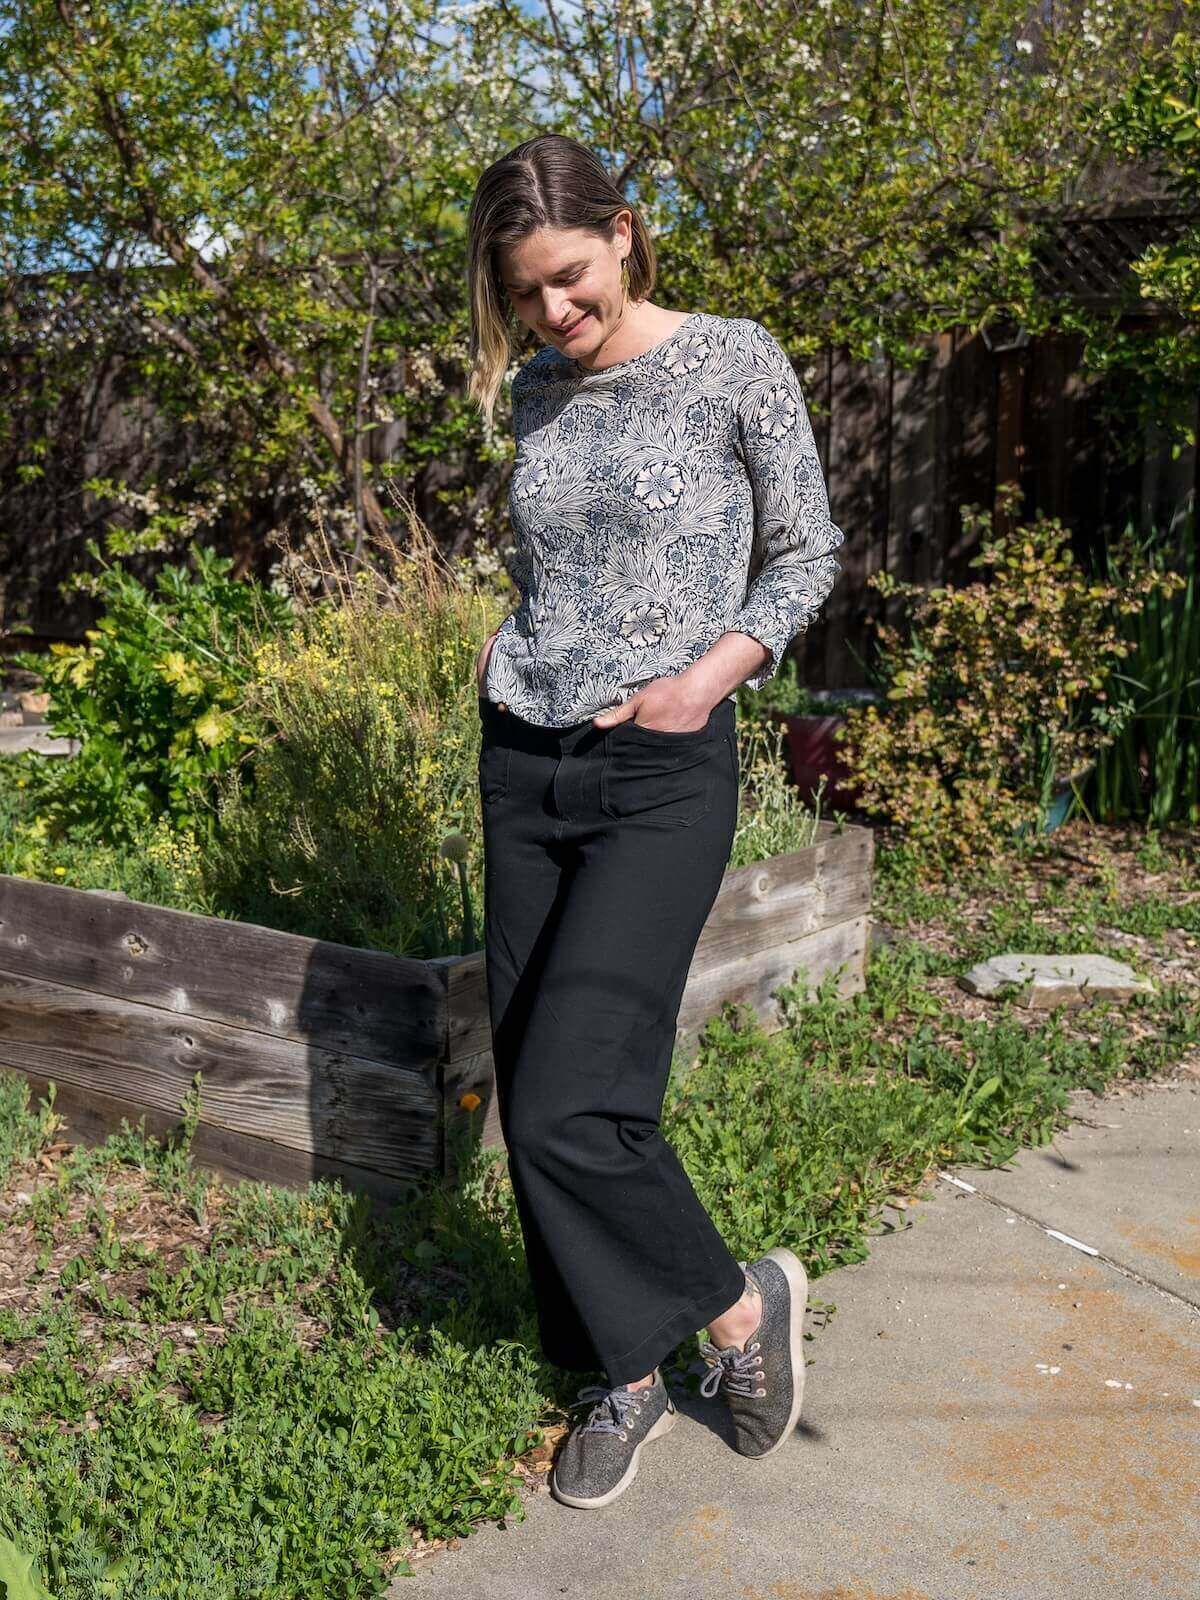 A young woman in black pants, a grey sweater, and grey sneakers poses on a sidewalk with a green front garden behind her.